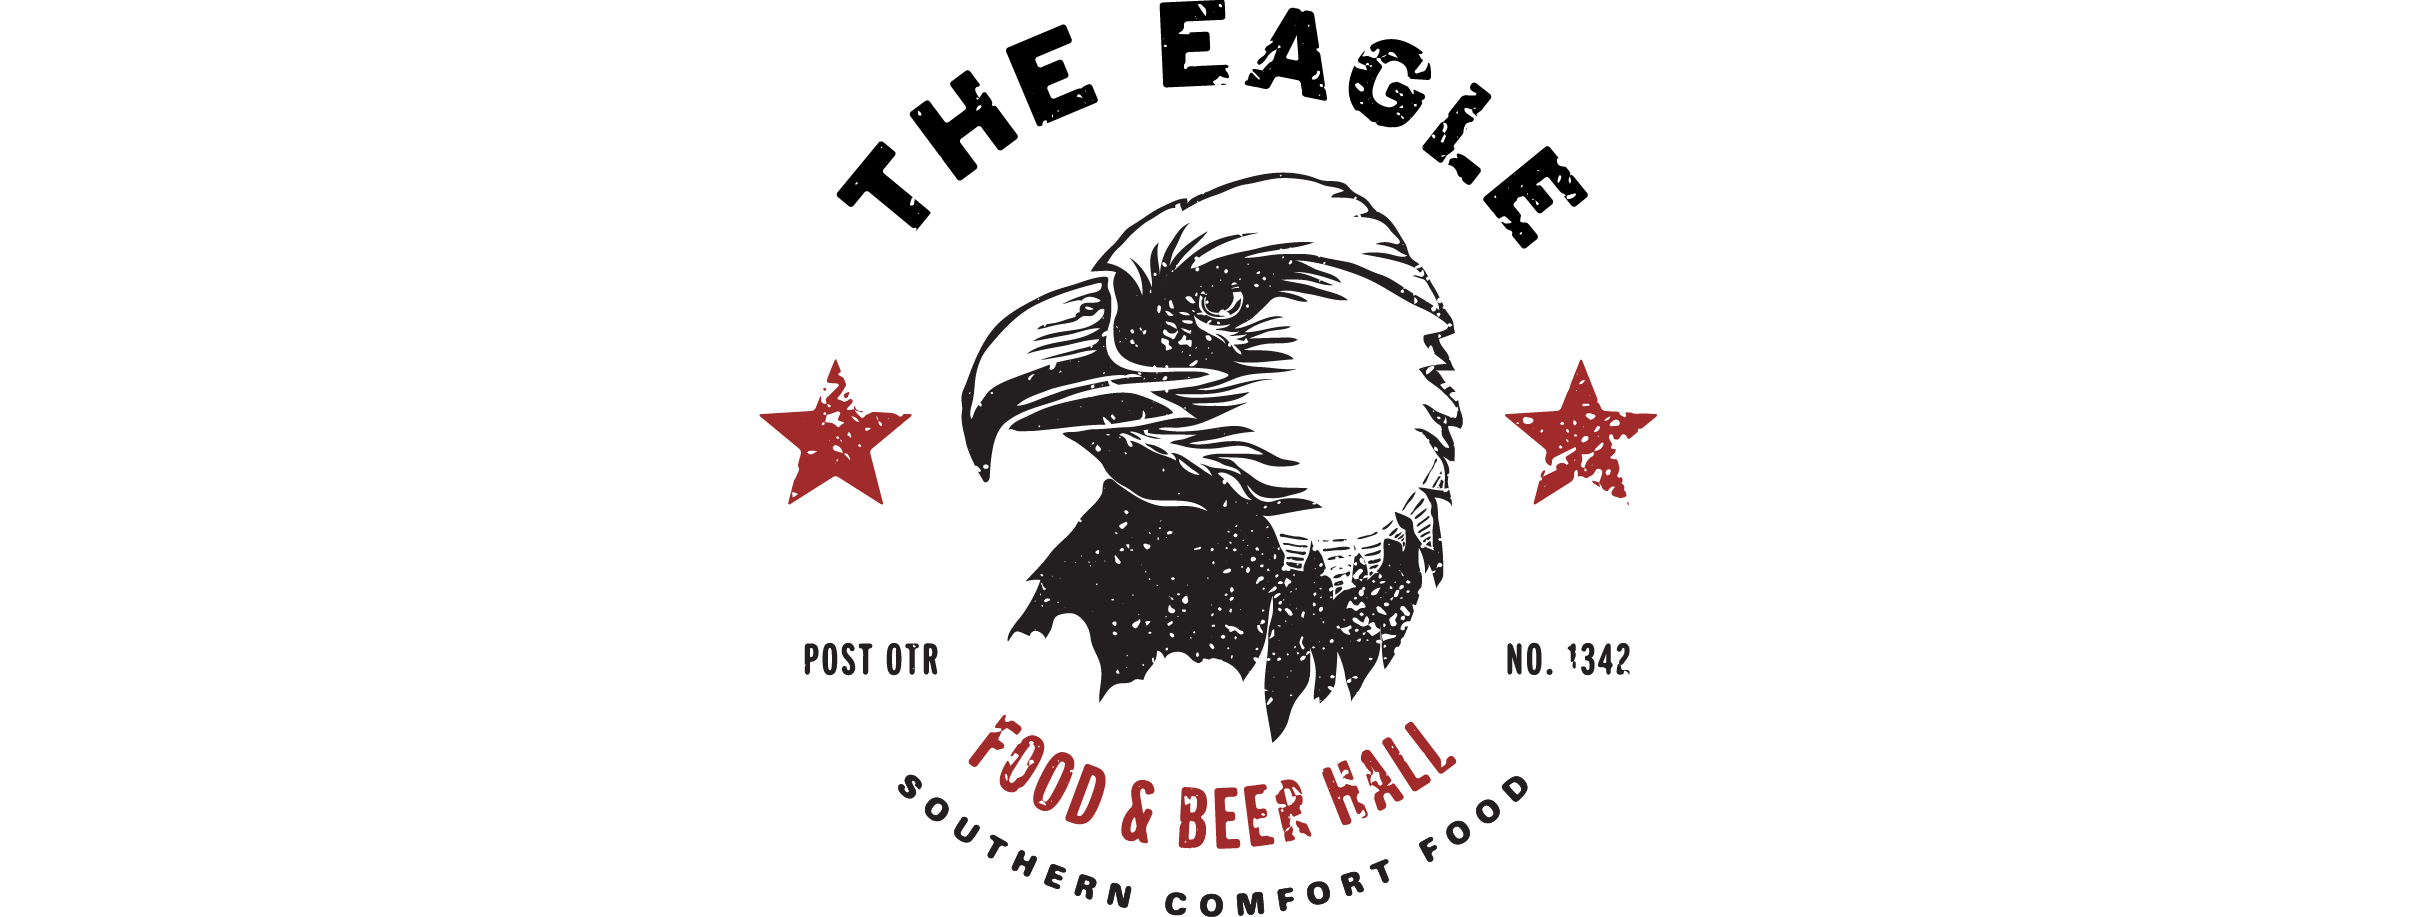 The Eagle Catering